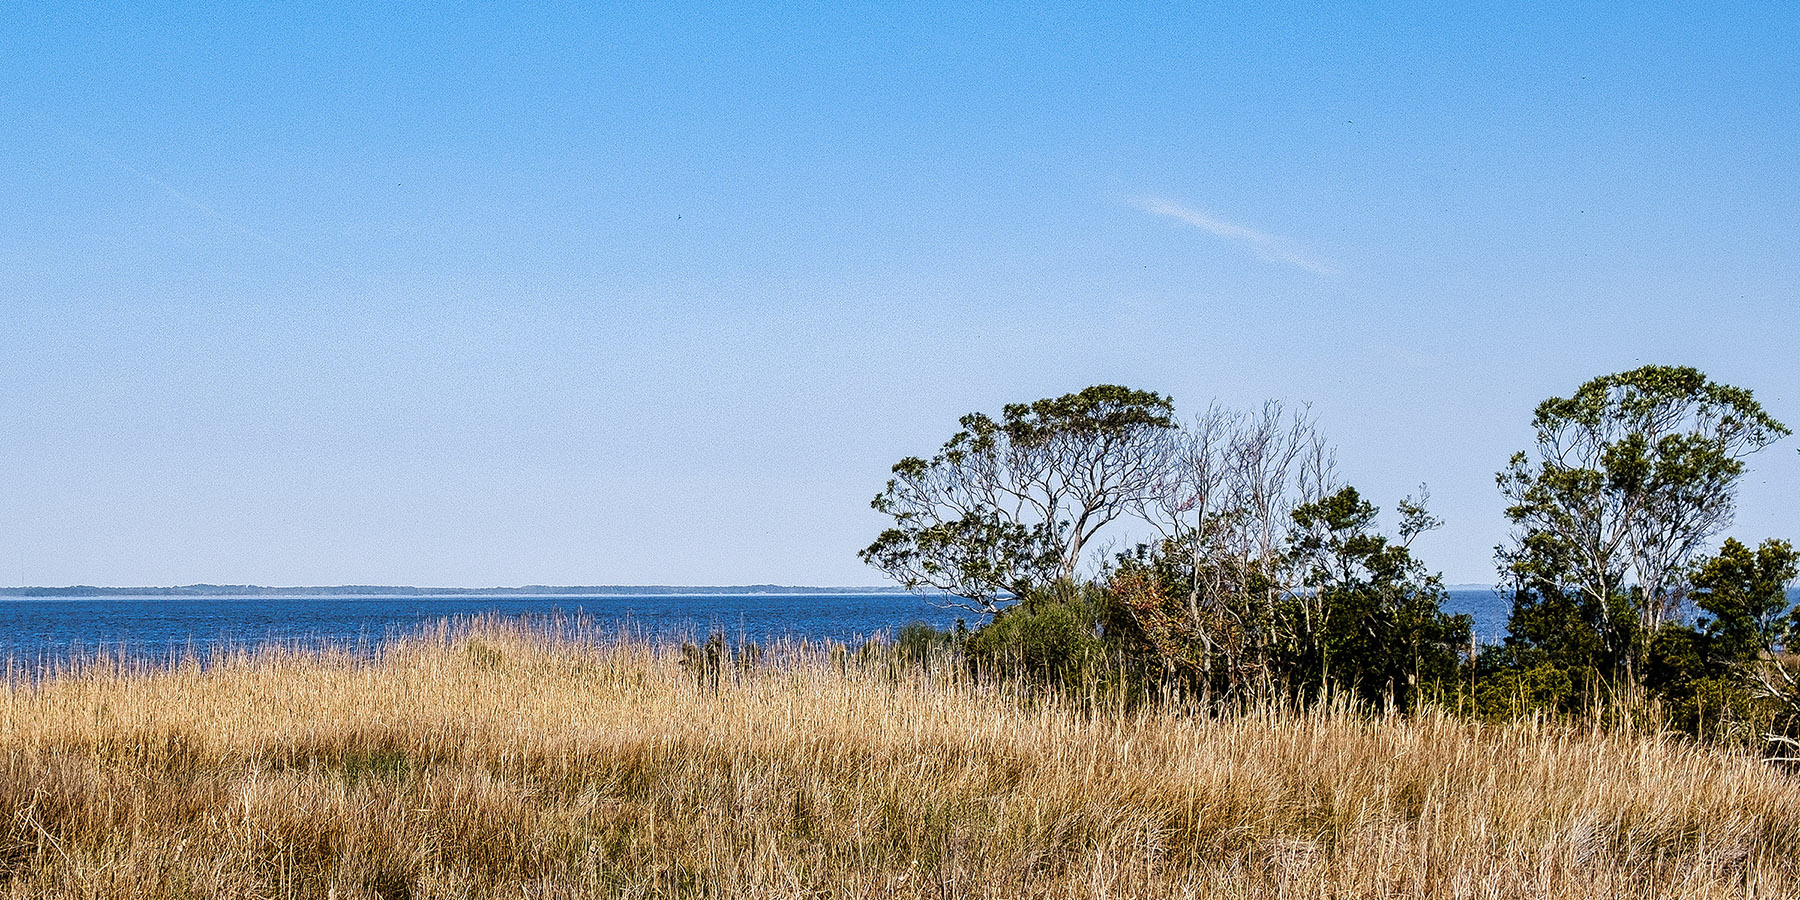 View of the Currituck Sound seen from Duck